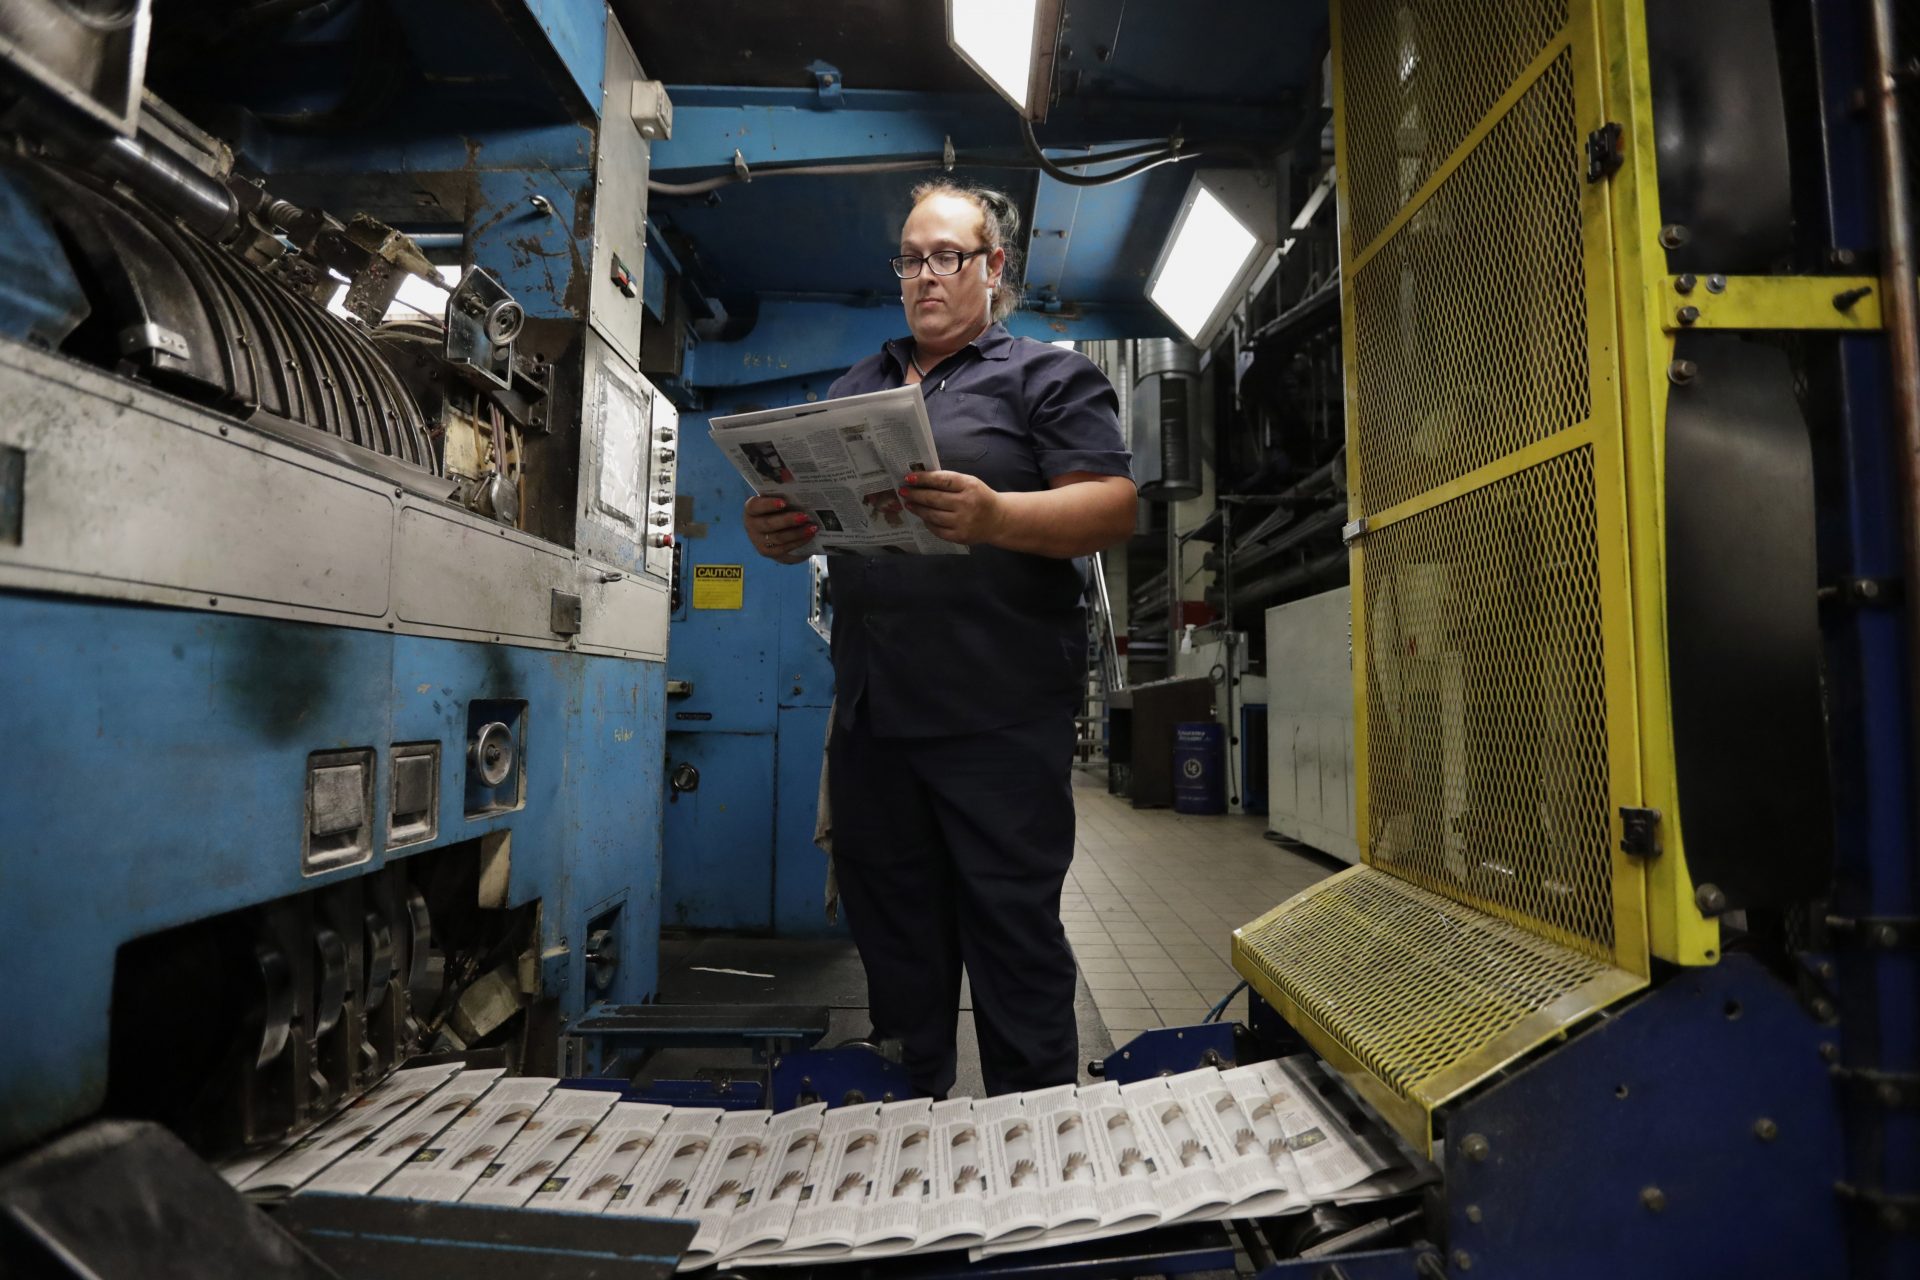 In this Tuesday, Aug. 6, 2019, photo, press operator Robin Yeager looks over the registration of a newspaper in Youngstown, Ohio. The Youngstown paper announced in June it would cease publication Saturday, Aug. 31, because of financial struggles, but the paper will be printed by the Tribune Chronicle, which has bought The Vindicator name, subscriber list and website from owners of the Youngstown publication.